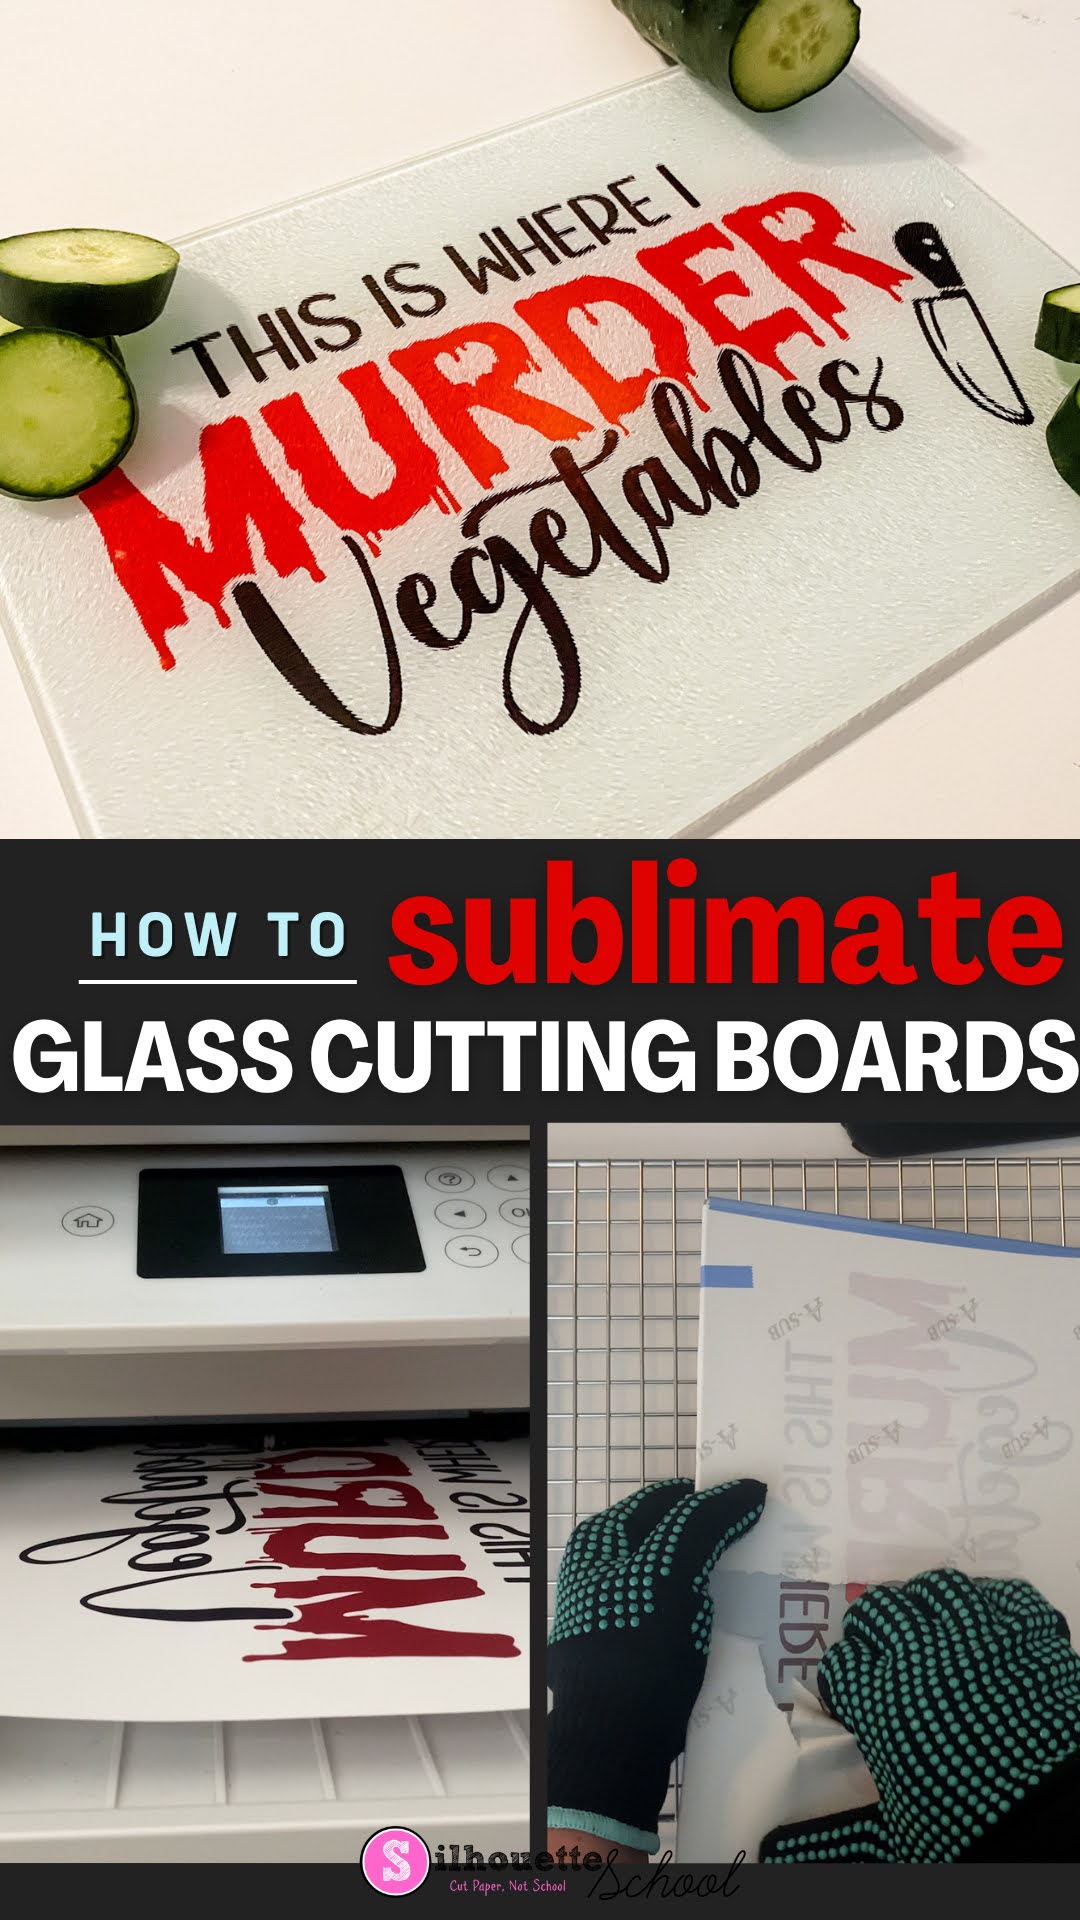 How to Do Sublimation on Glass Cutting Boards - Silhouette School